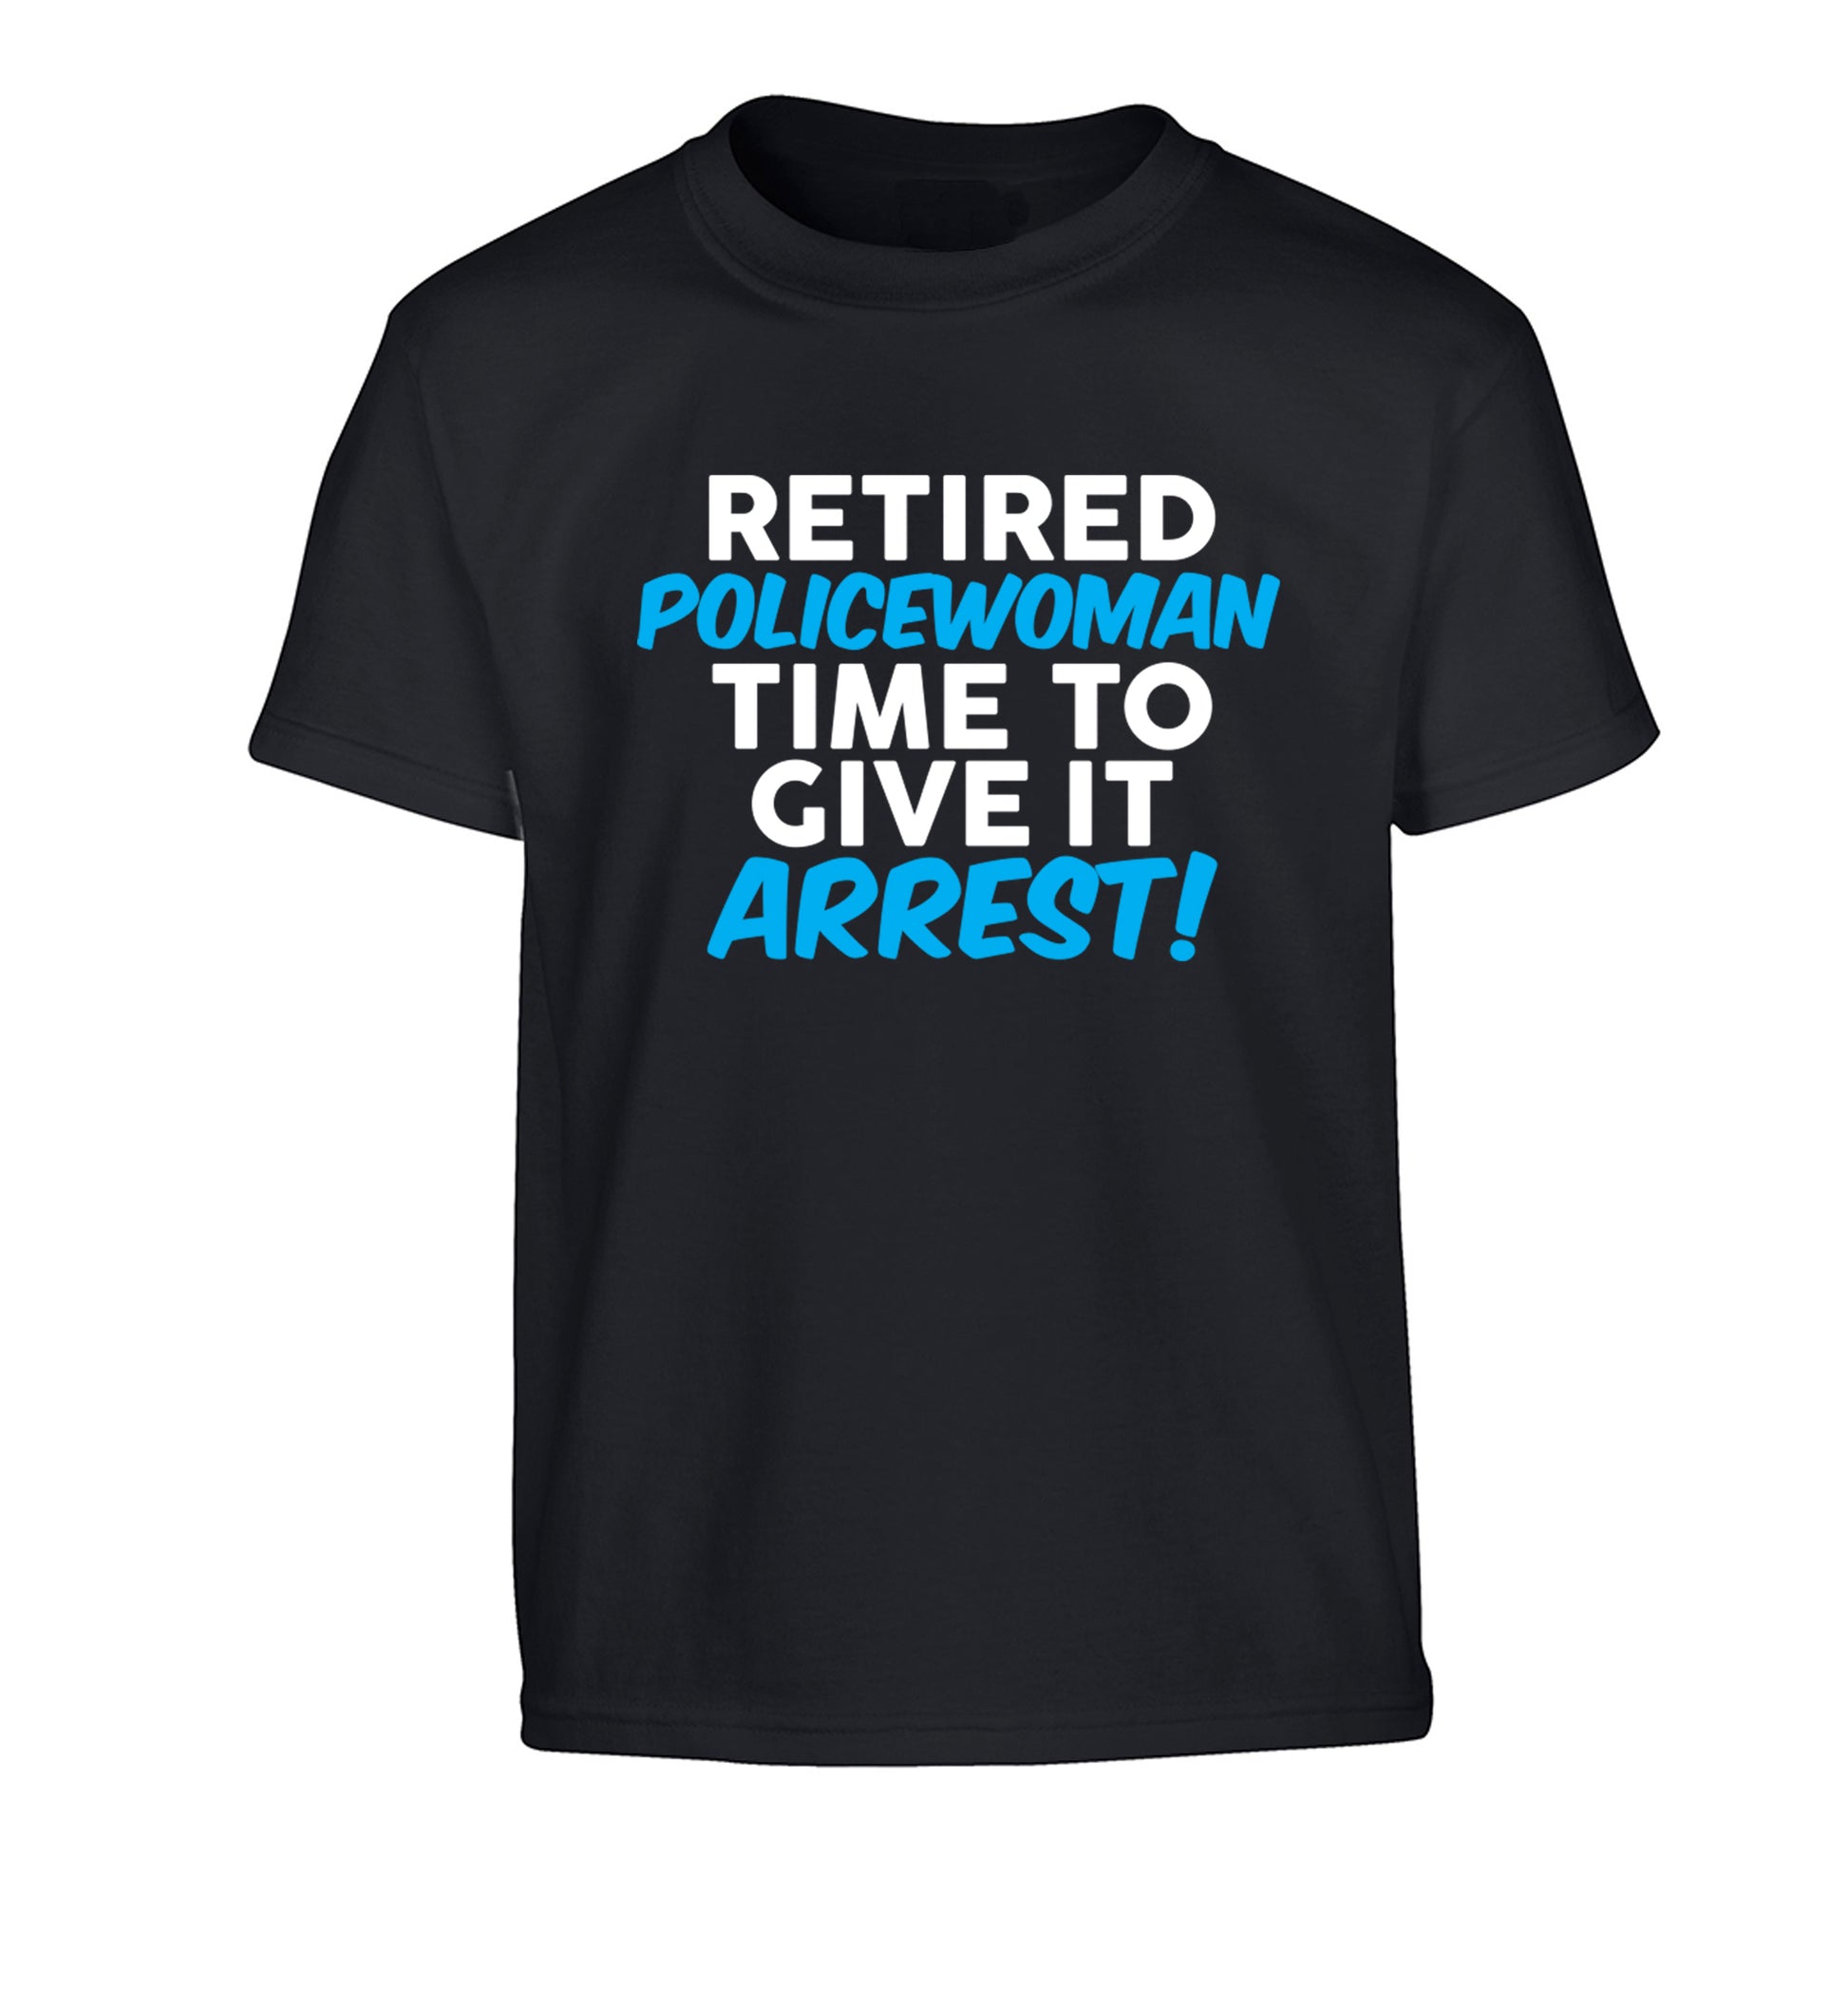 Retired policewoman time to give it arrest Children's black Tshirt 12-13 Years